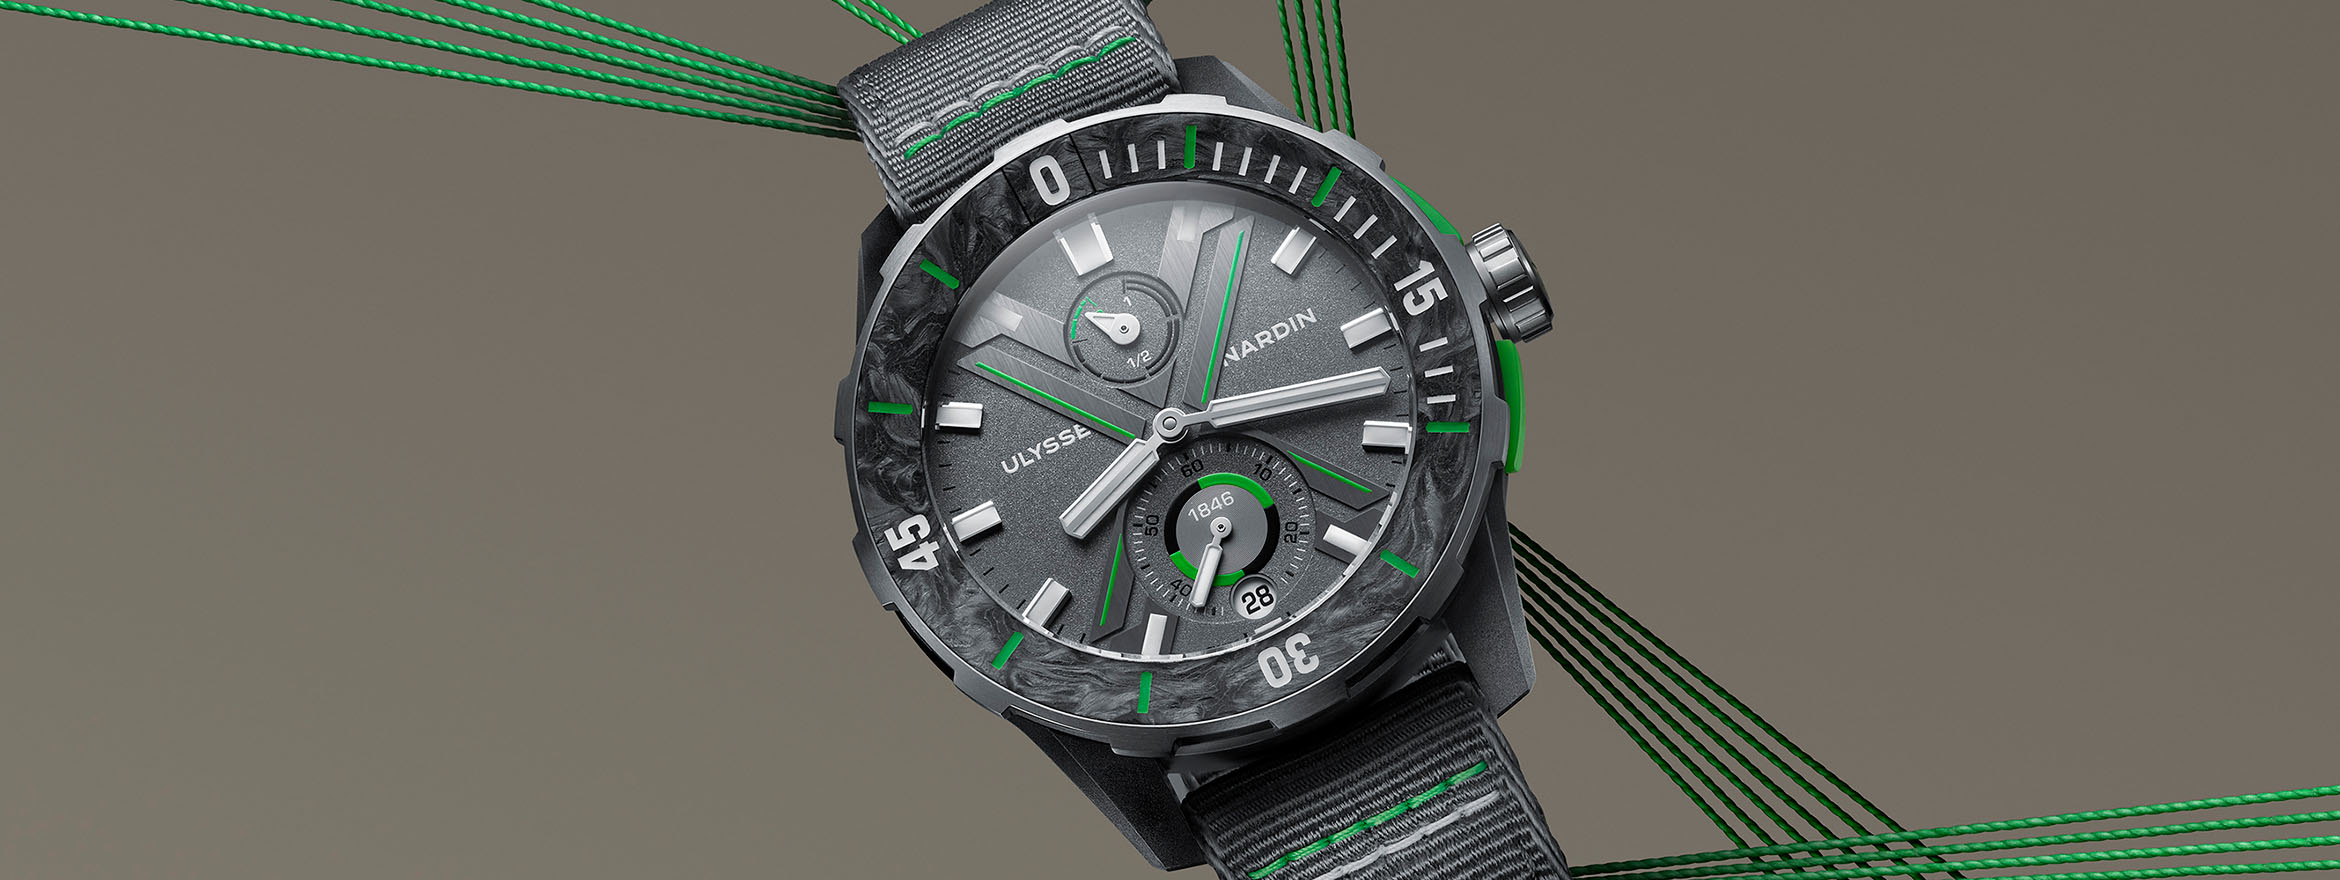 Ulysse Nardin Celebrates The Ocean Race with a New Innovative Diver